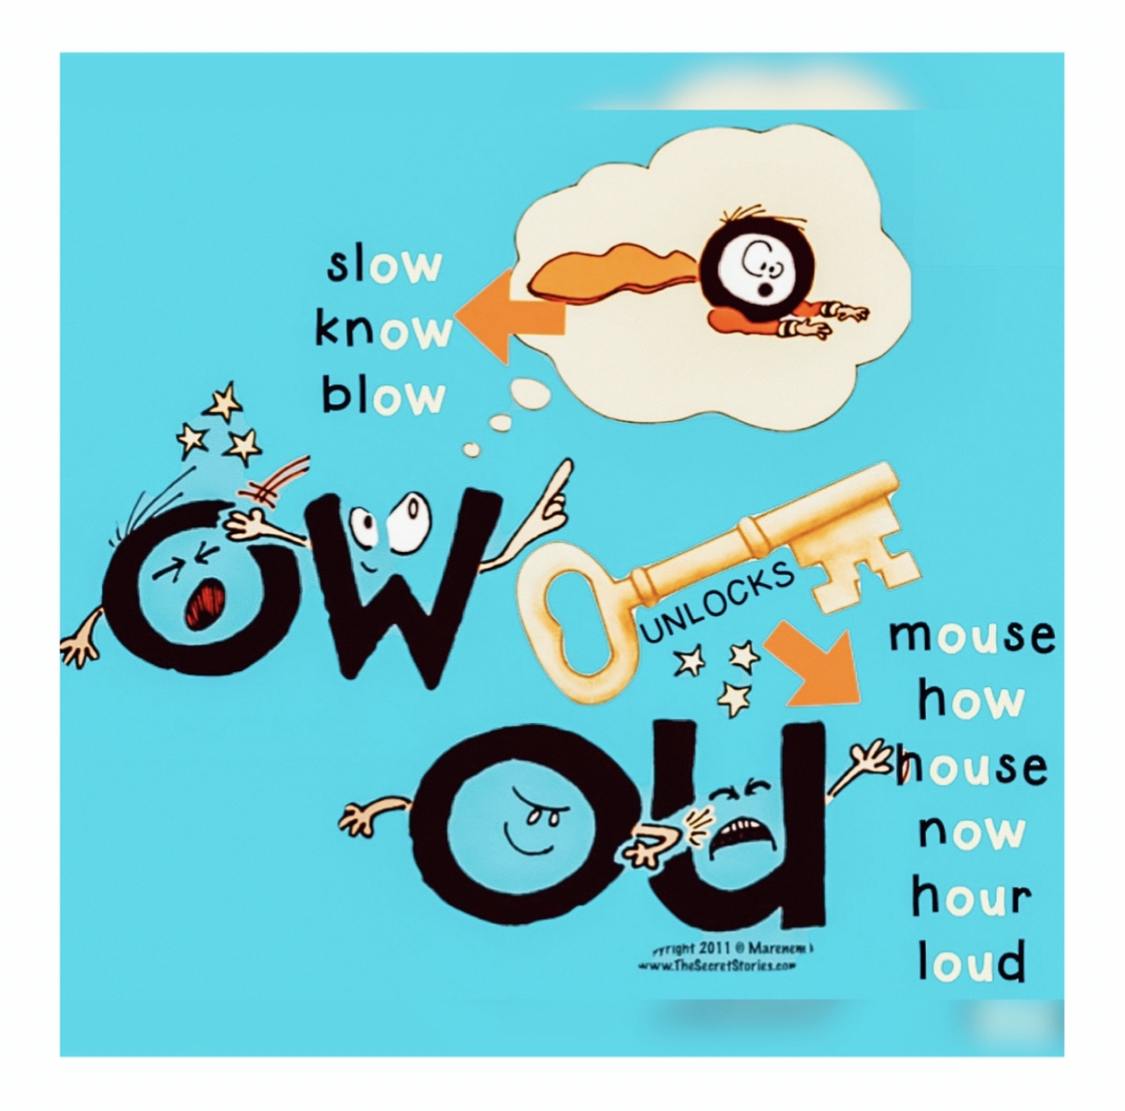 Phonics Story Poster for OU OW